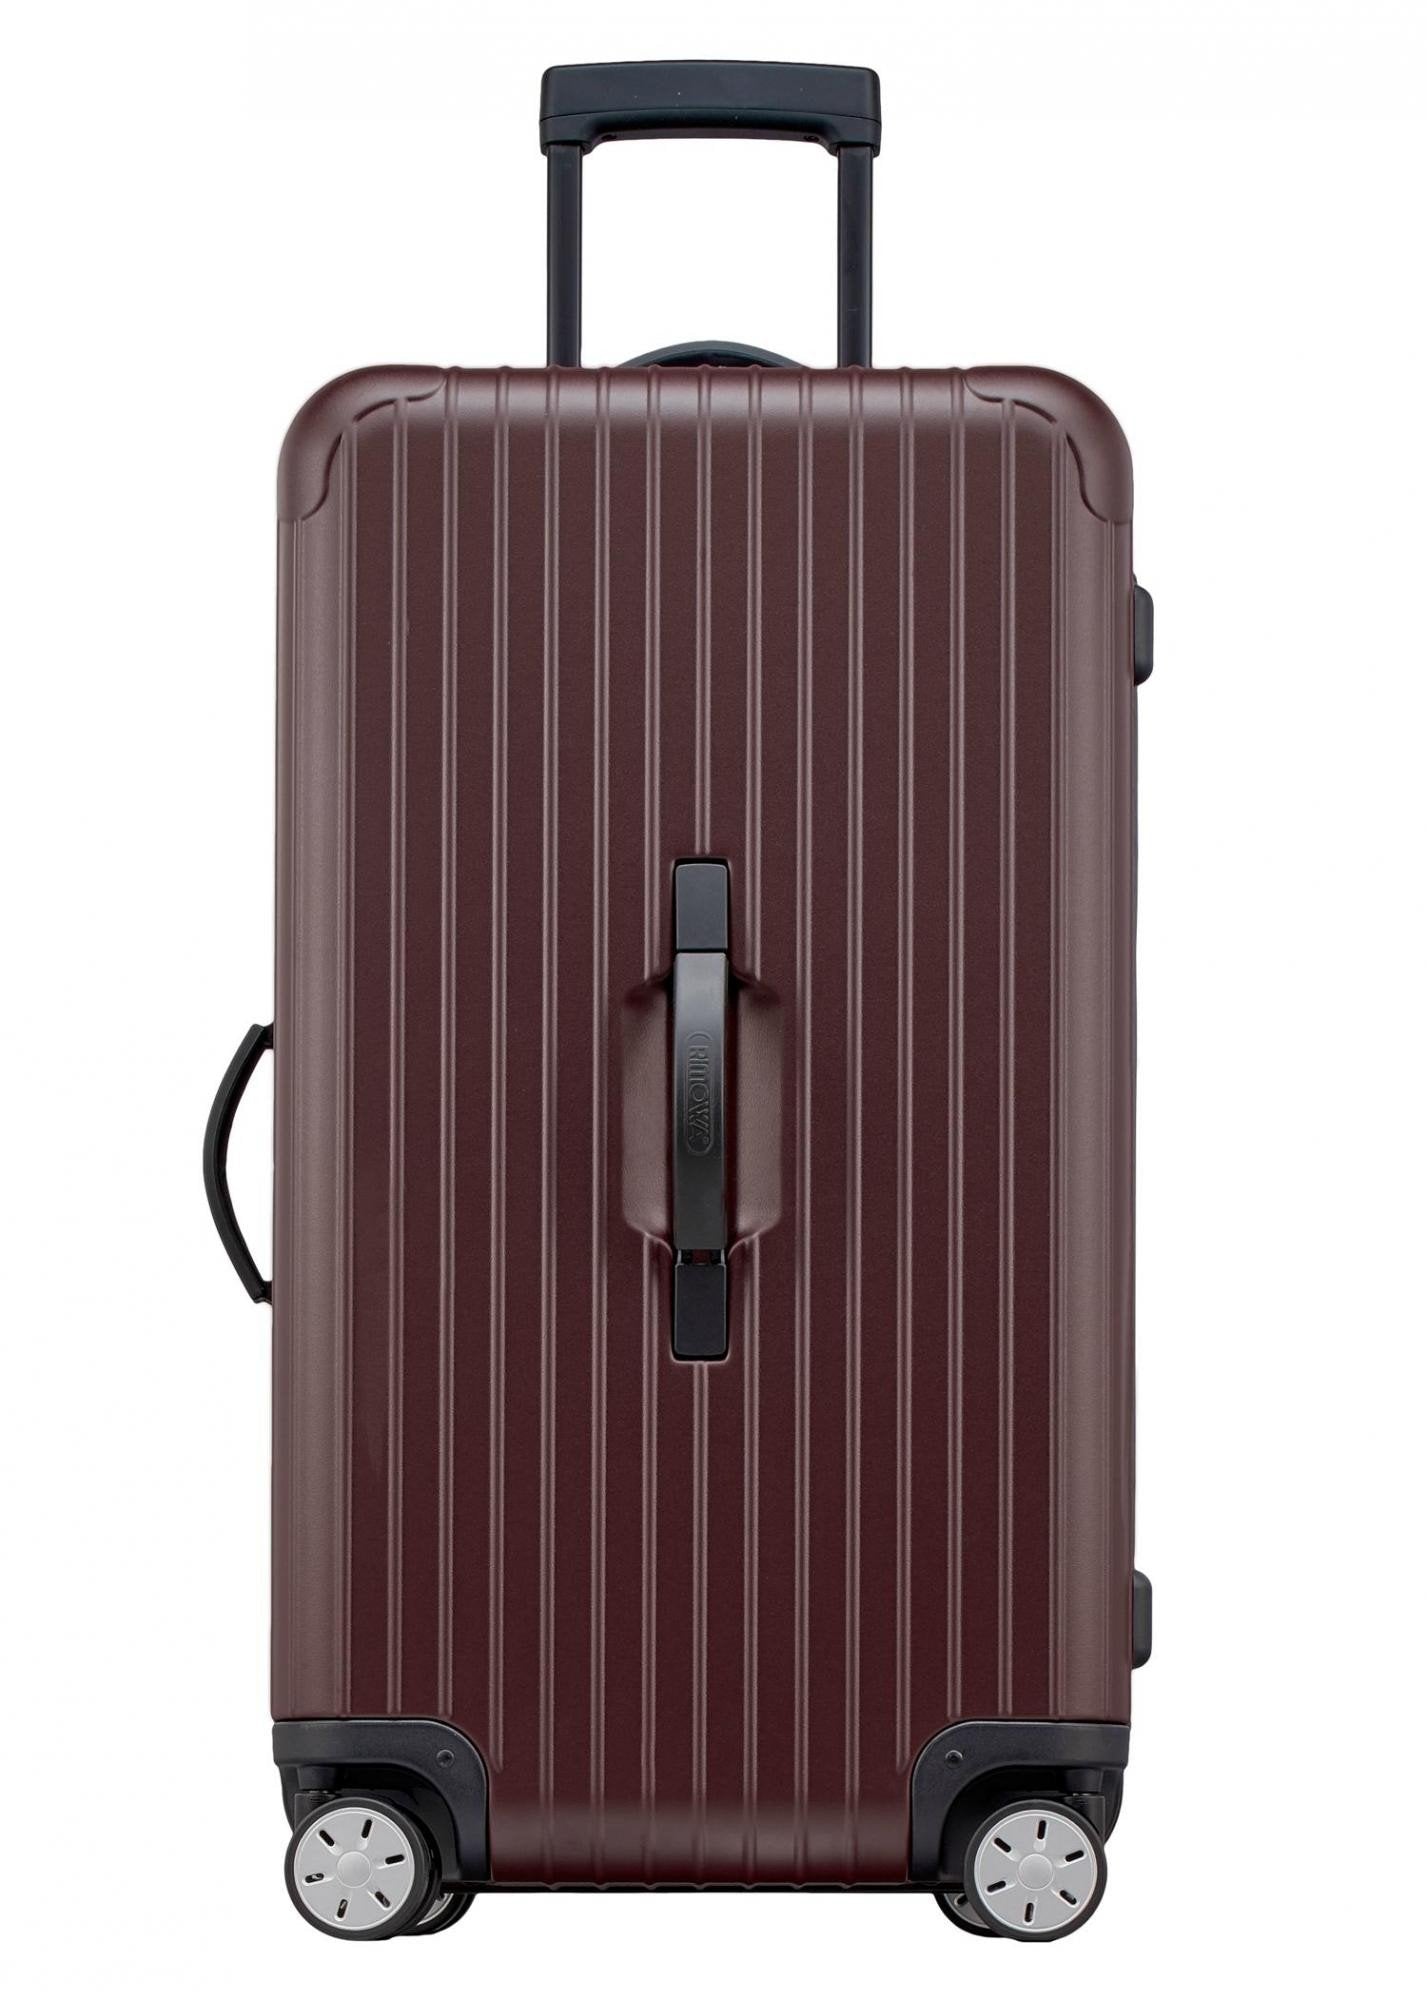 RIMOWA Red Travel Luggage for sale